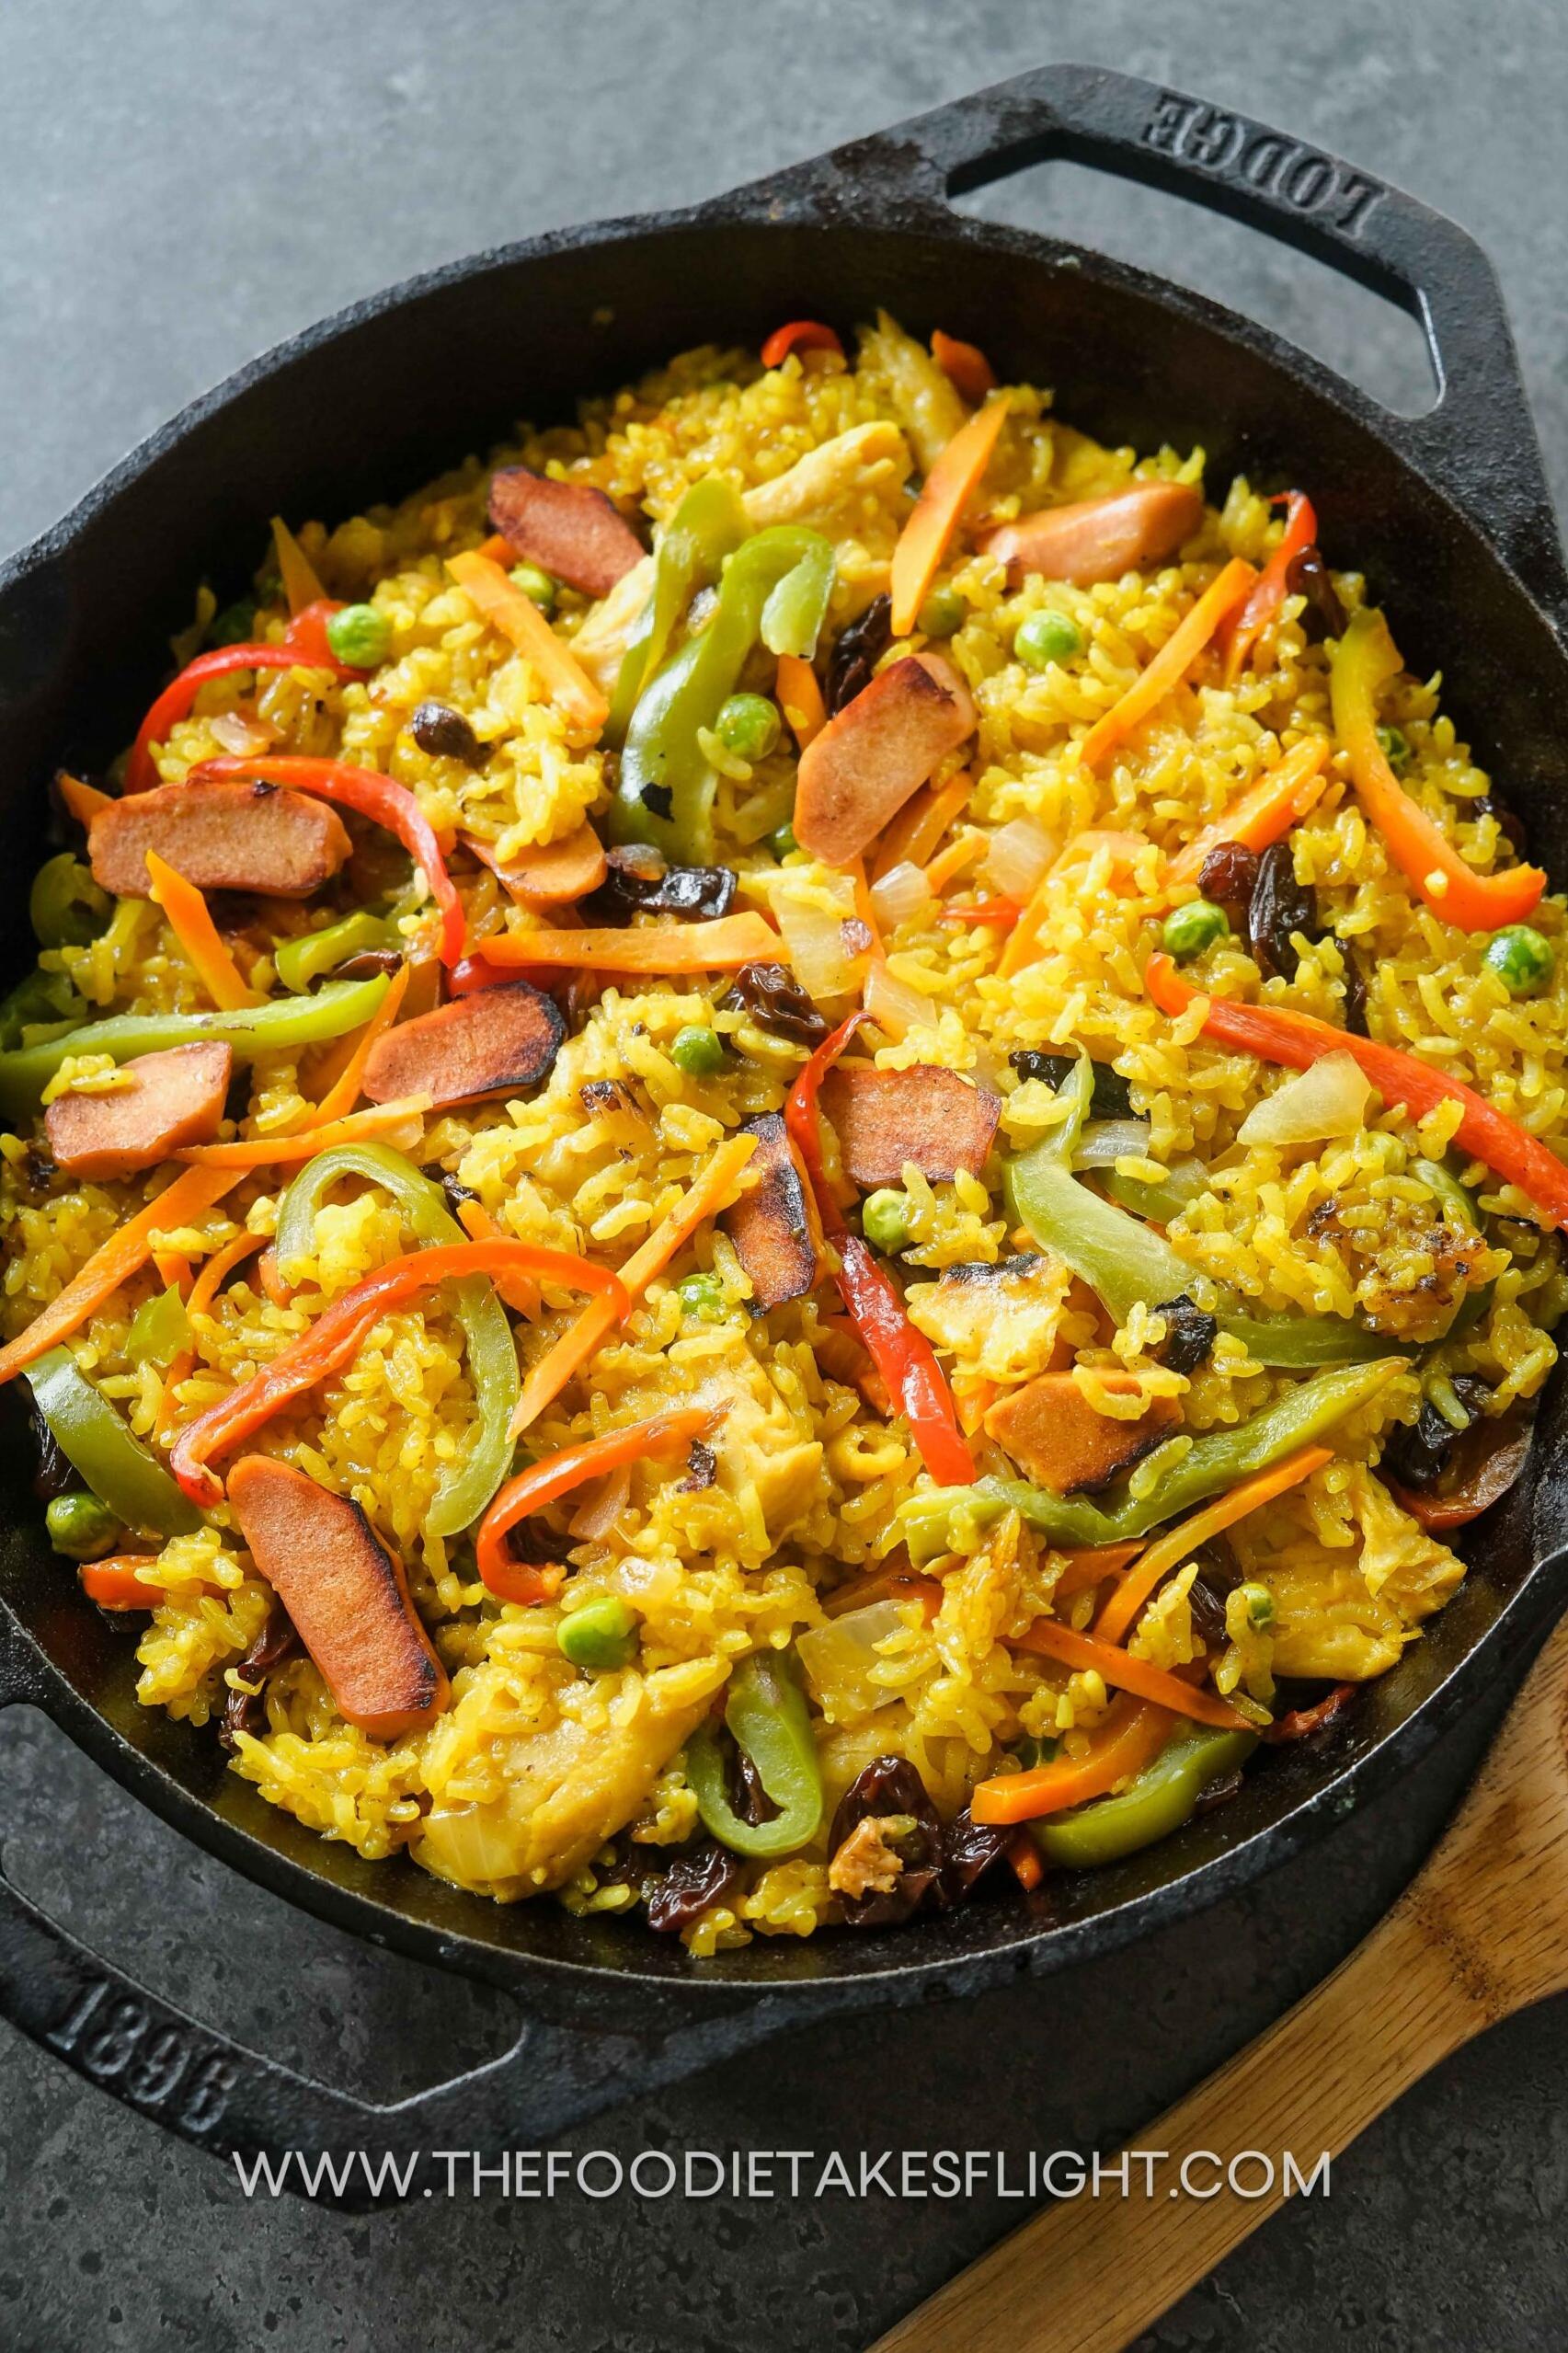  A fragrant mix of spices and flavors, Arroz Valenciana is a dish that will transport you straight to Spain.